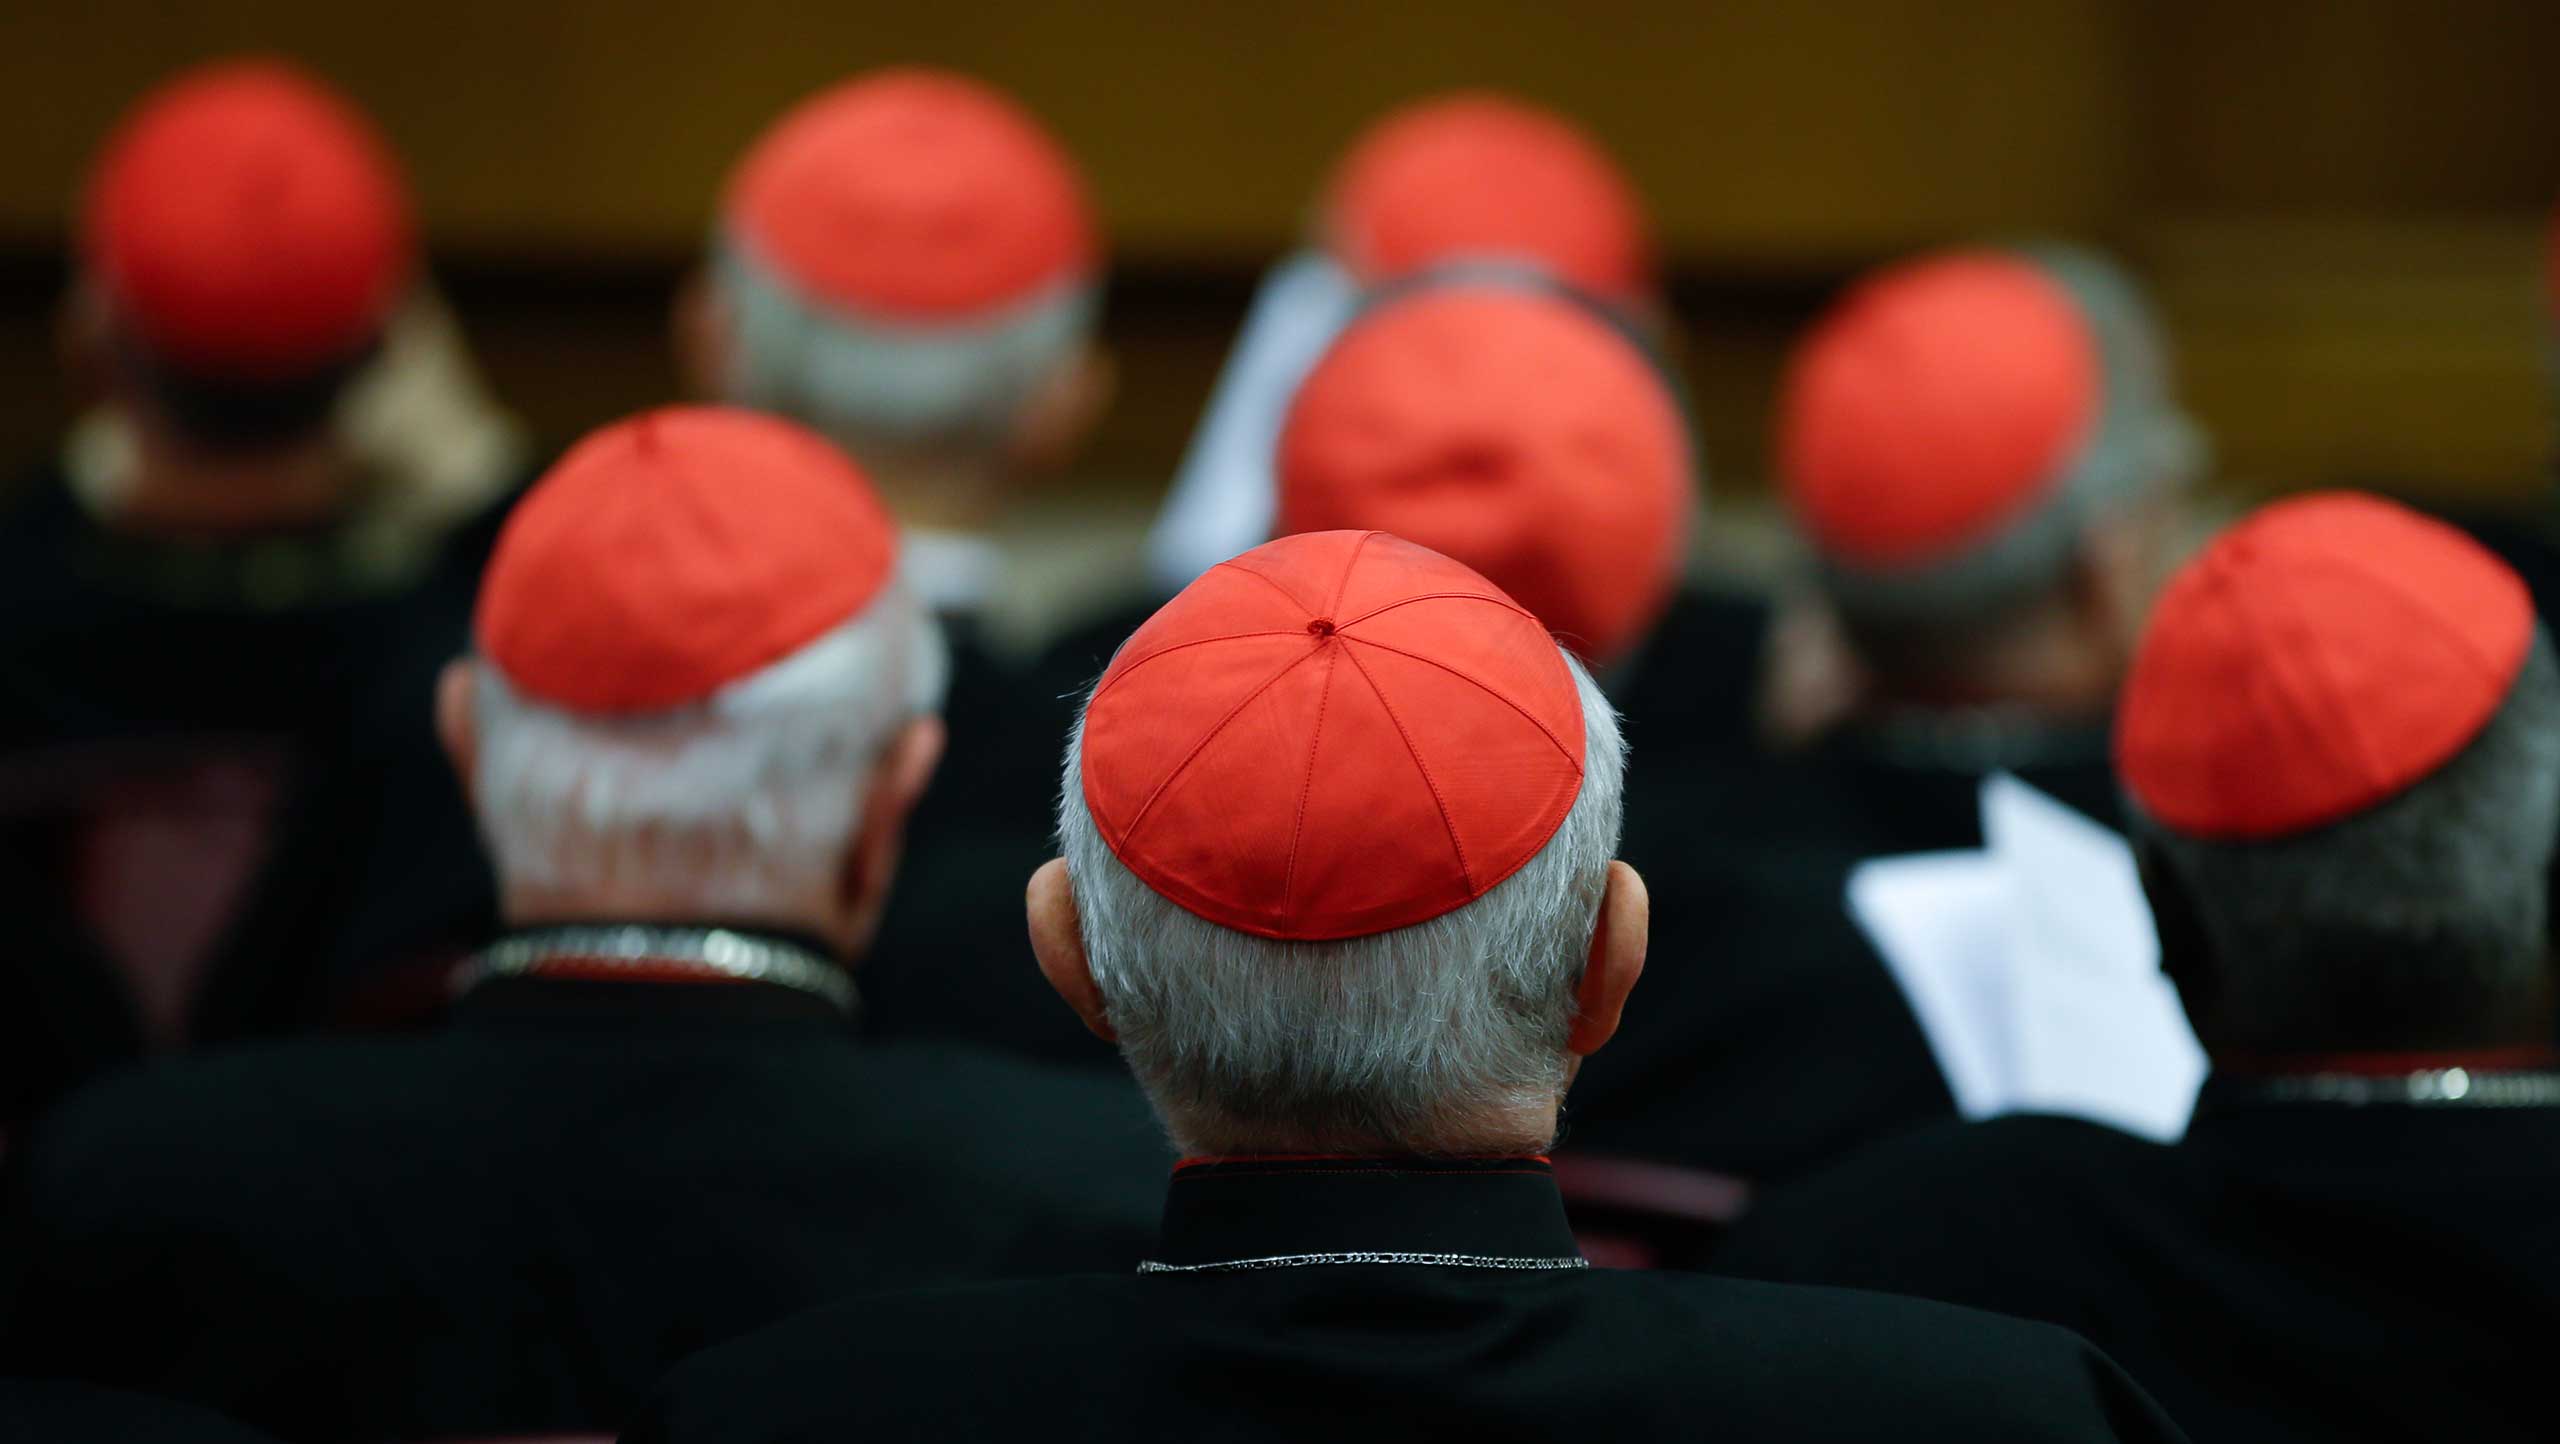 Cardinals listen to Pope Francis at the Vatican Oct. 20, 2014. (Max Rossi—Reuters)